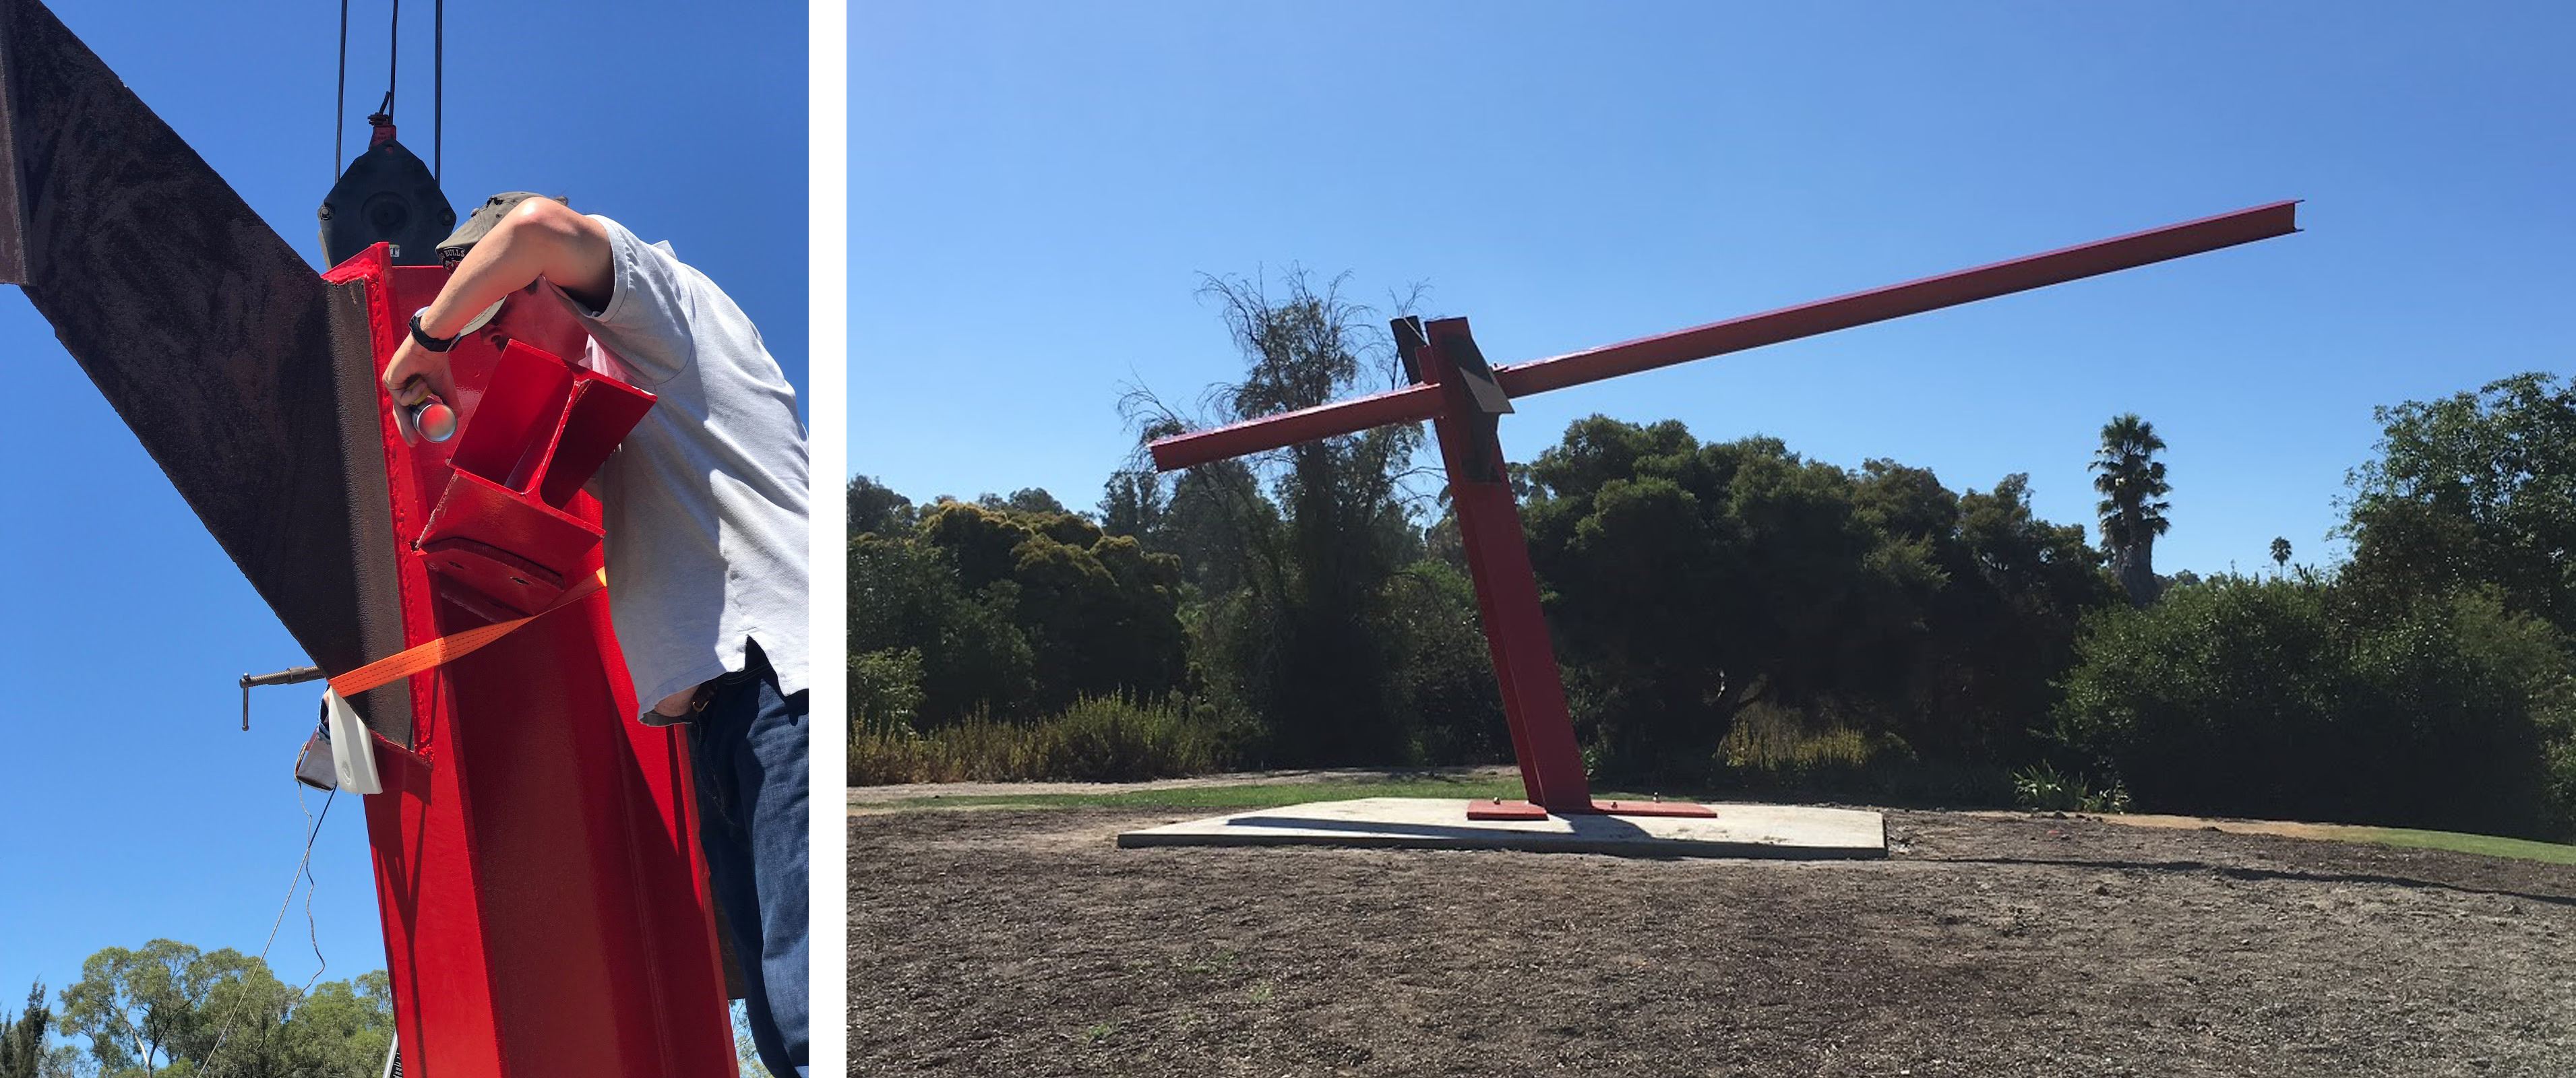 Installation photographs featuring Mark di Suvero’s Teha (1971), in the exhibition Hide and Seek: Art Meets Nature, at the South Coast Botanic Garden, © Mark di Suvero